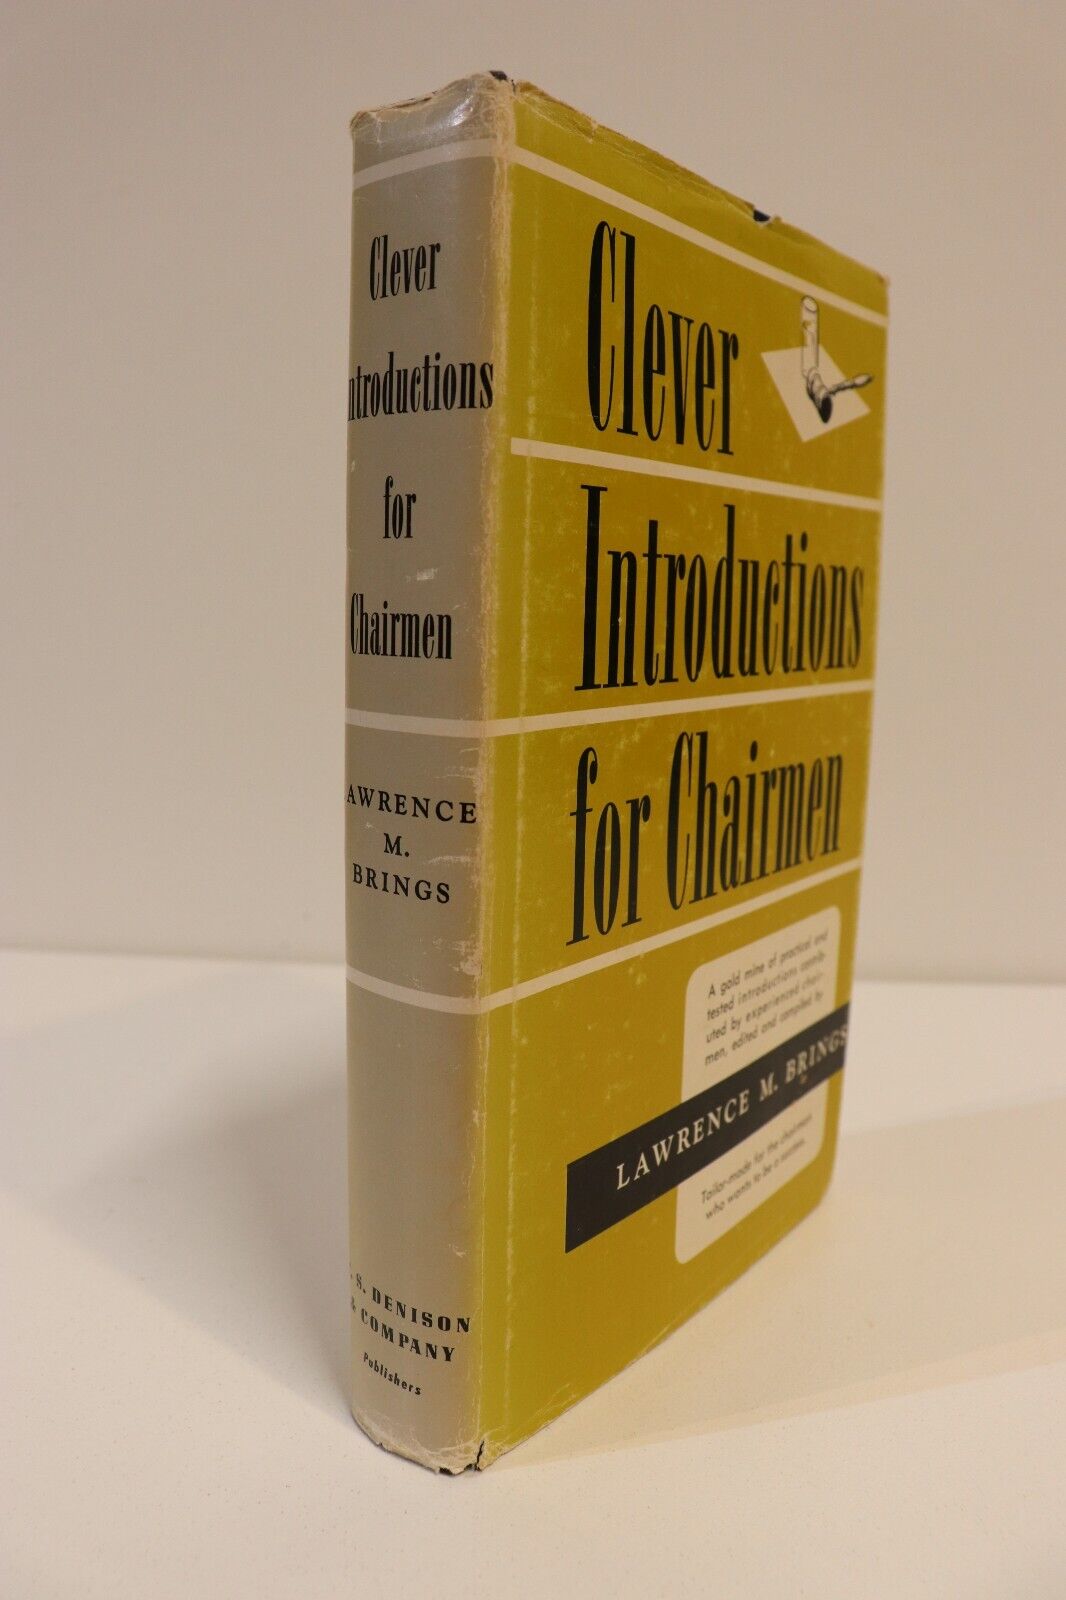 Clever Introductions For Chairmen - 1972 - Vintage Speech Writing Reference Book